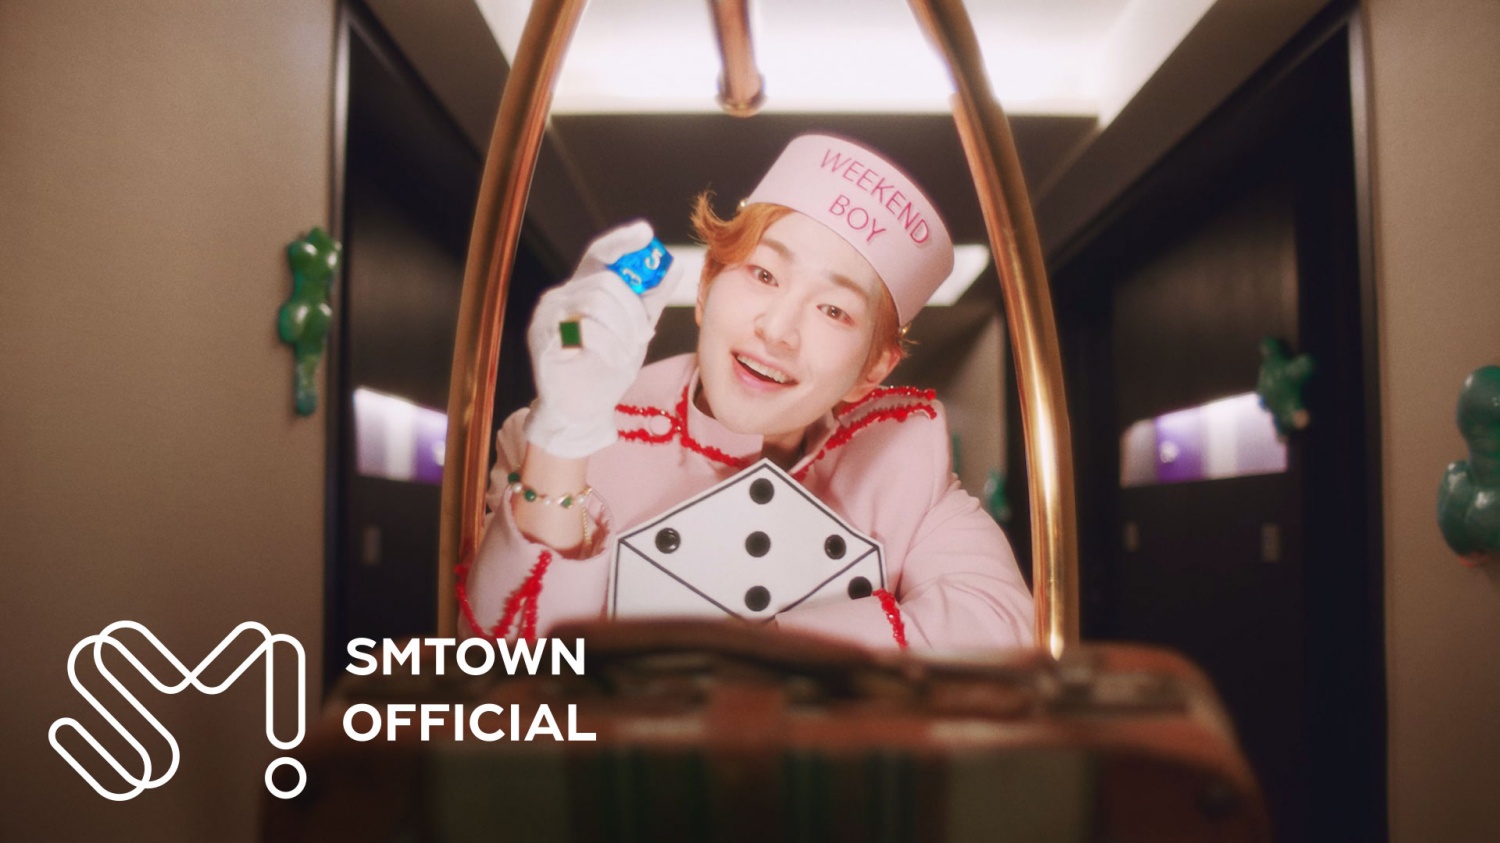 SHINee Onew Releases 'DICE' MV